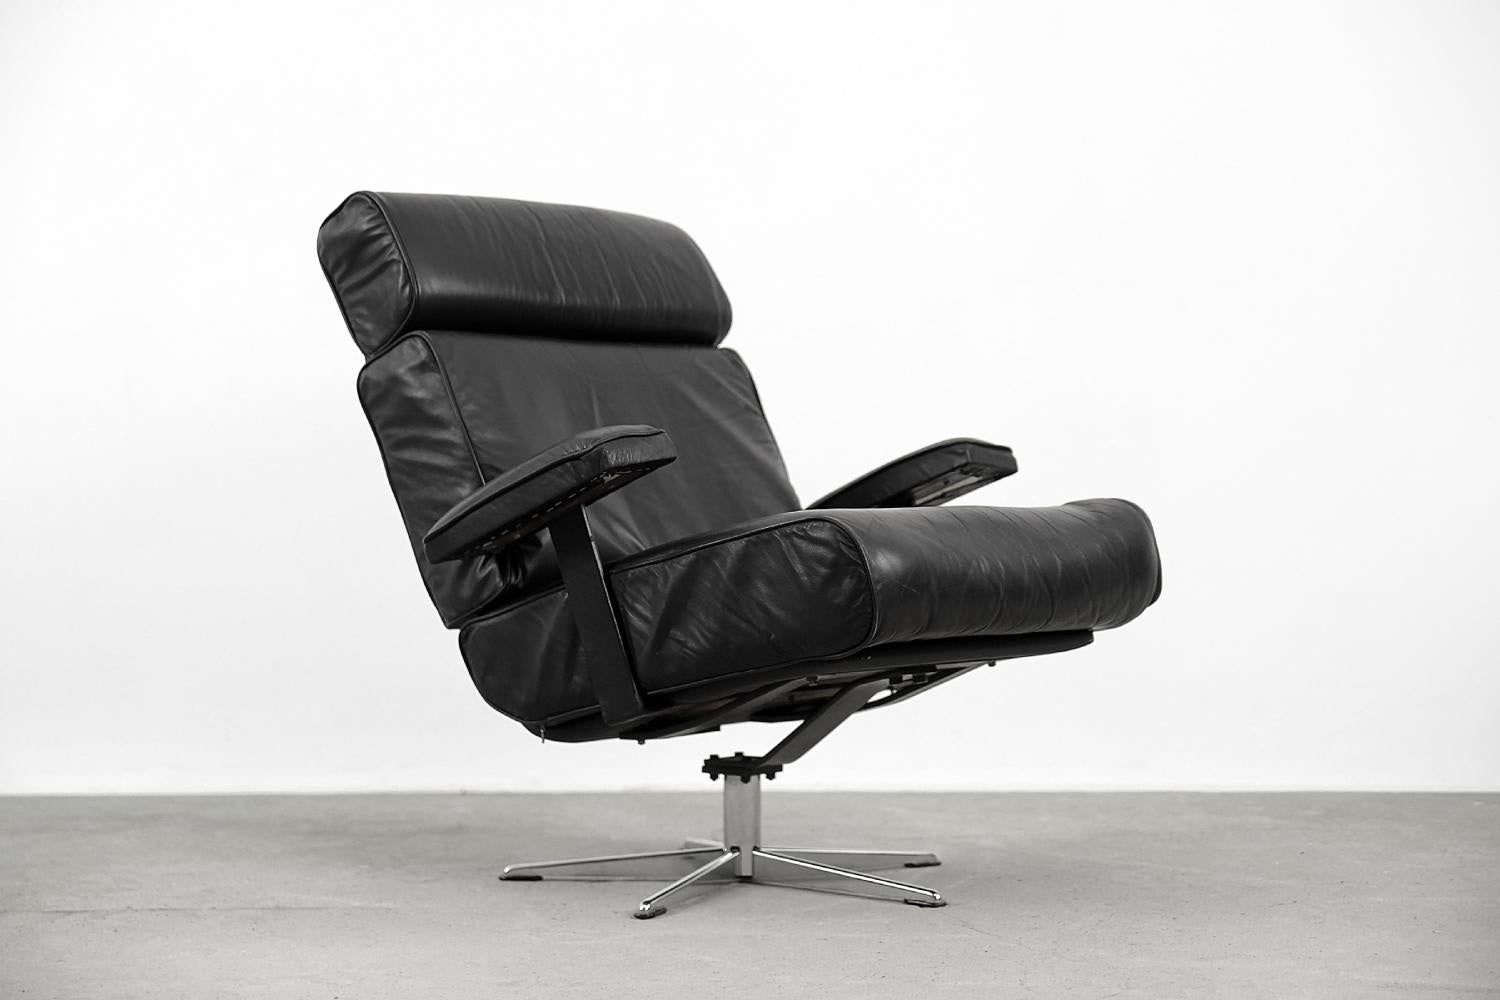 Rare Vintage Mid-Century German Modern Office Swivel Leather Easy Chair, 1960s In Good Condition For Sale In Warszawa, Mazowieckie